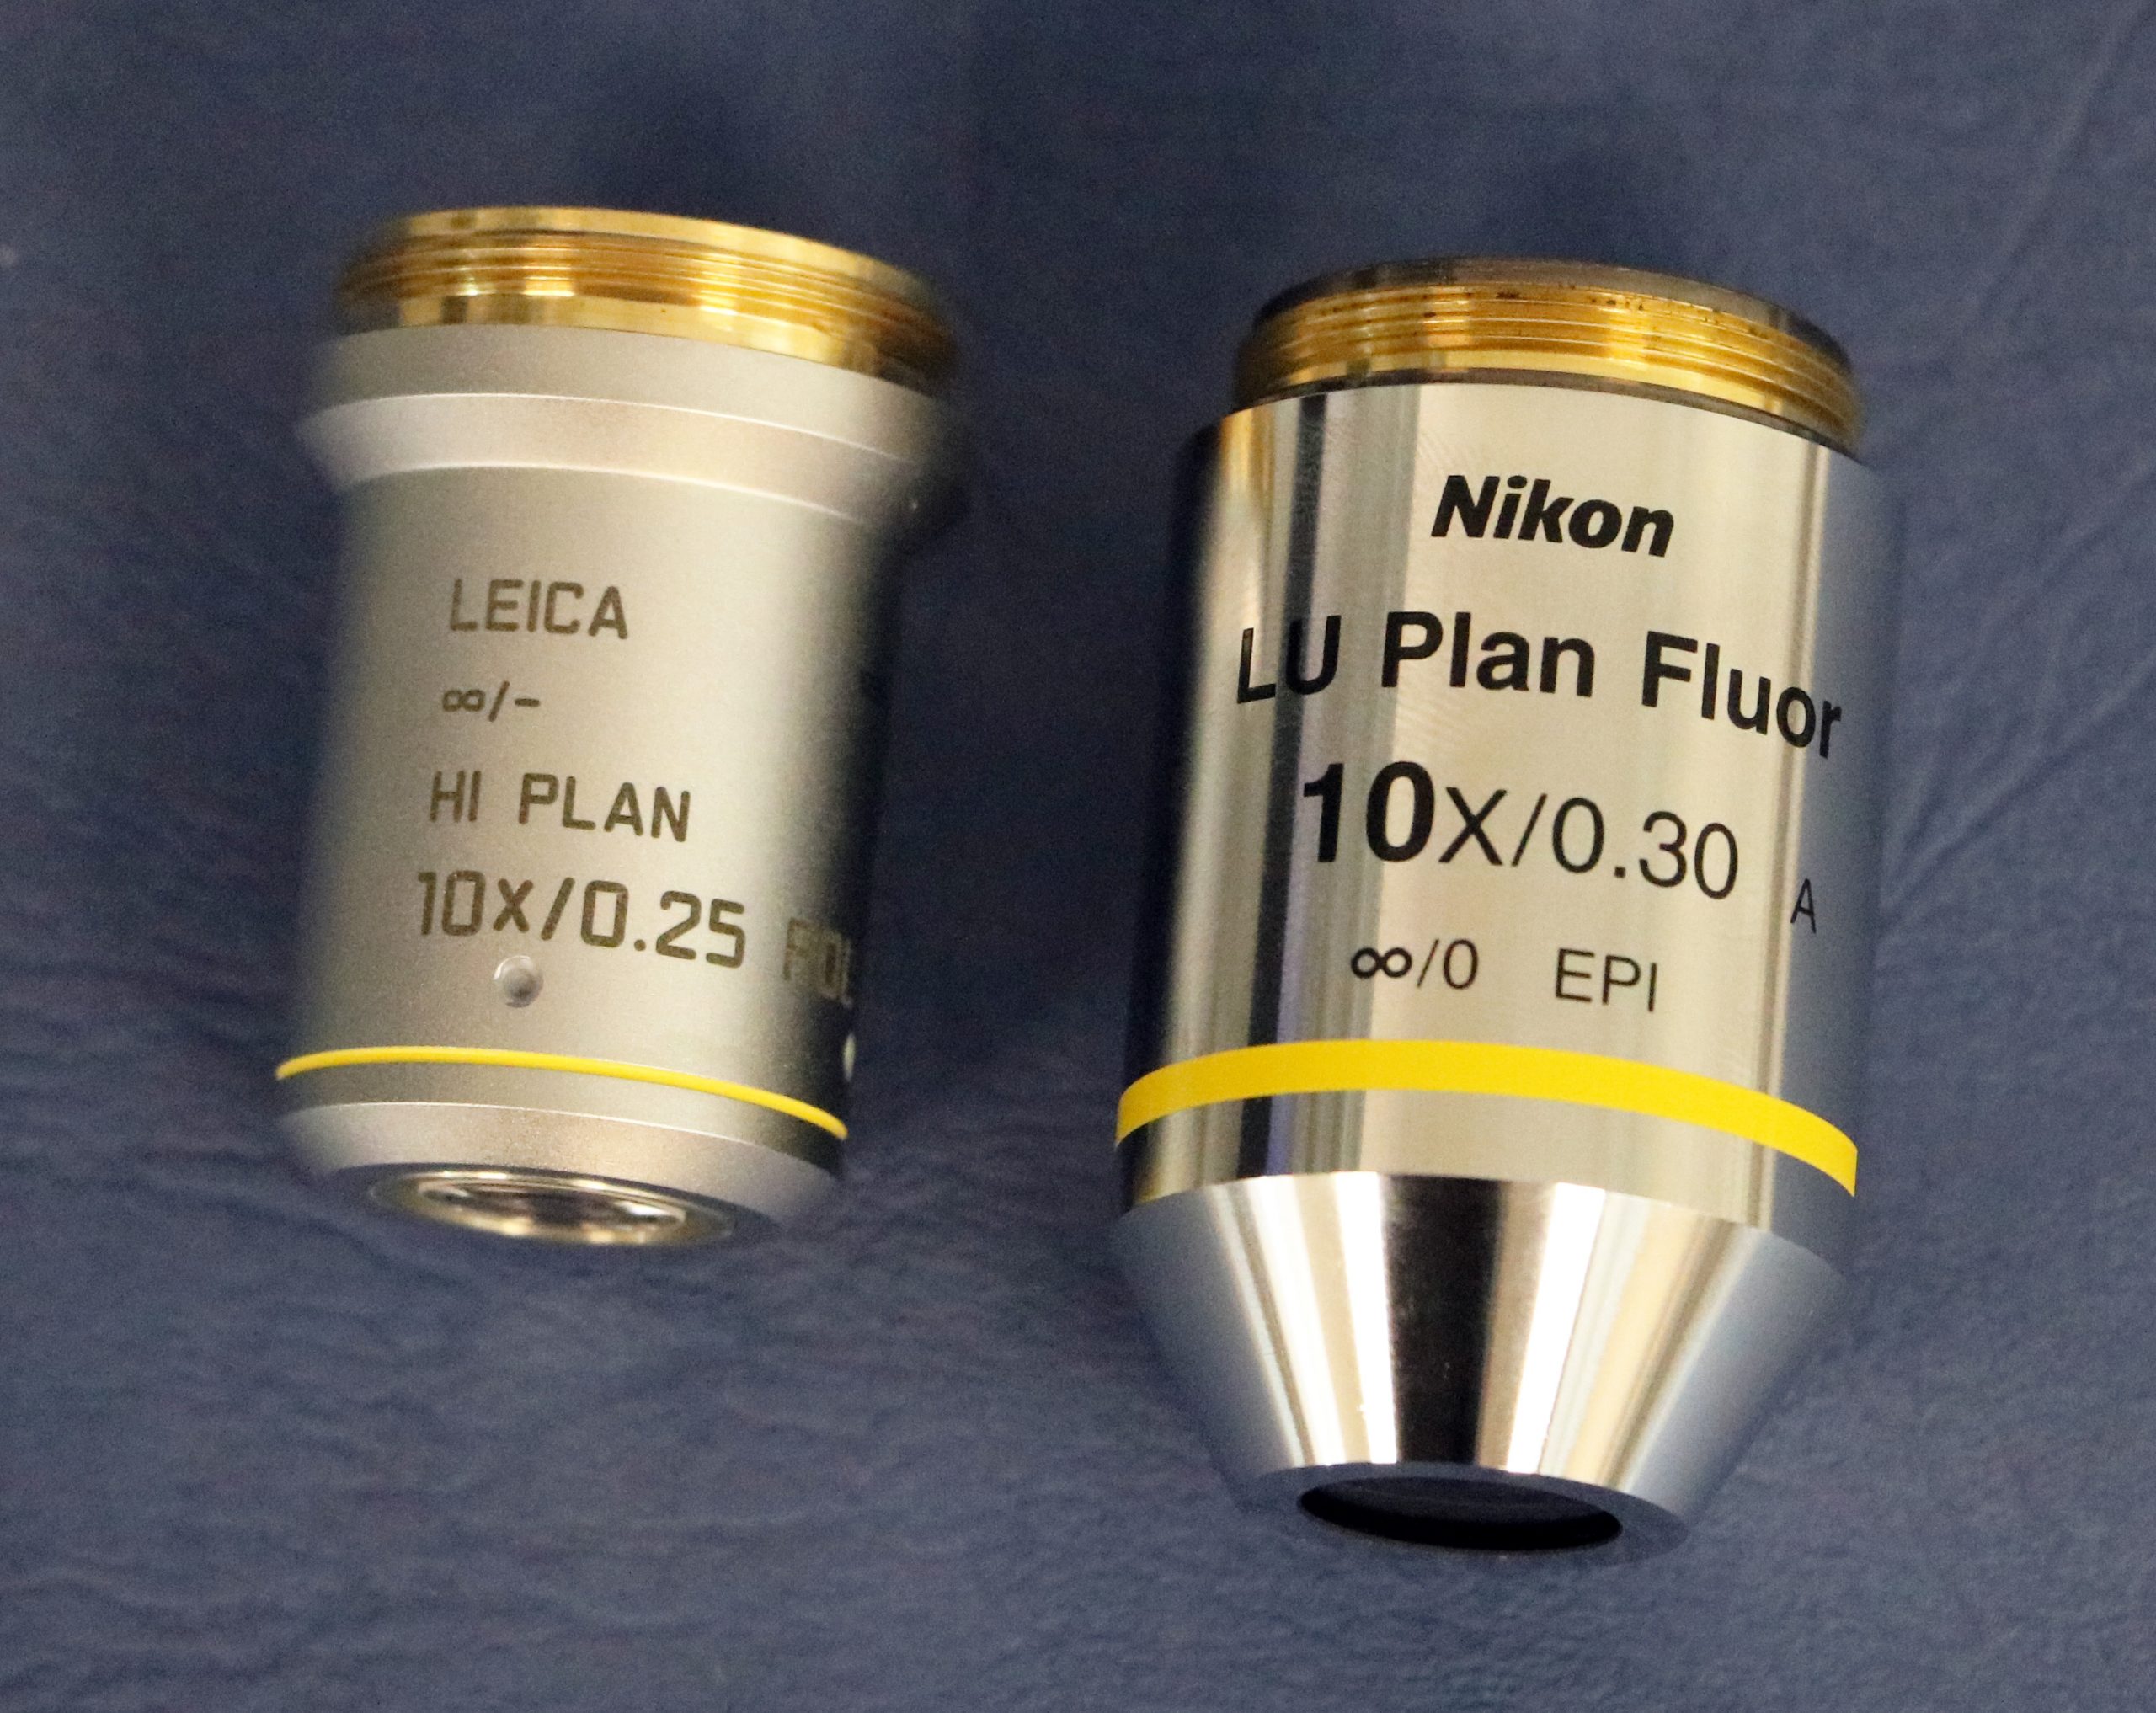 Figure 2.4.12 Objective lenses from two brands of polarizing light microscope. The magnification (10x) and numeric aperture (0.25 and 0.30) are written on each objective.